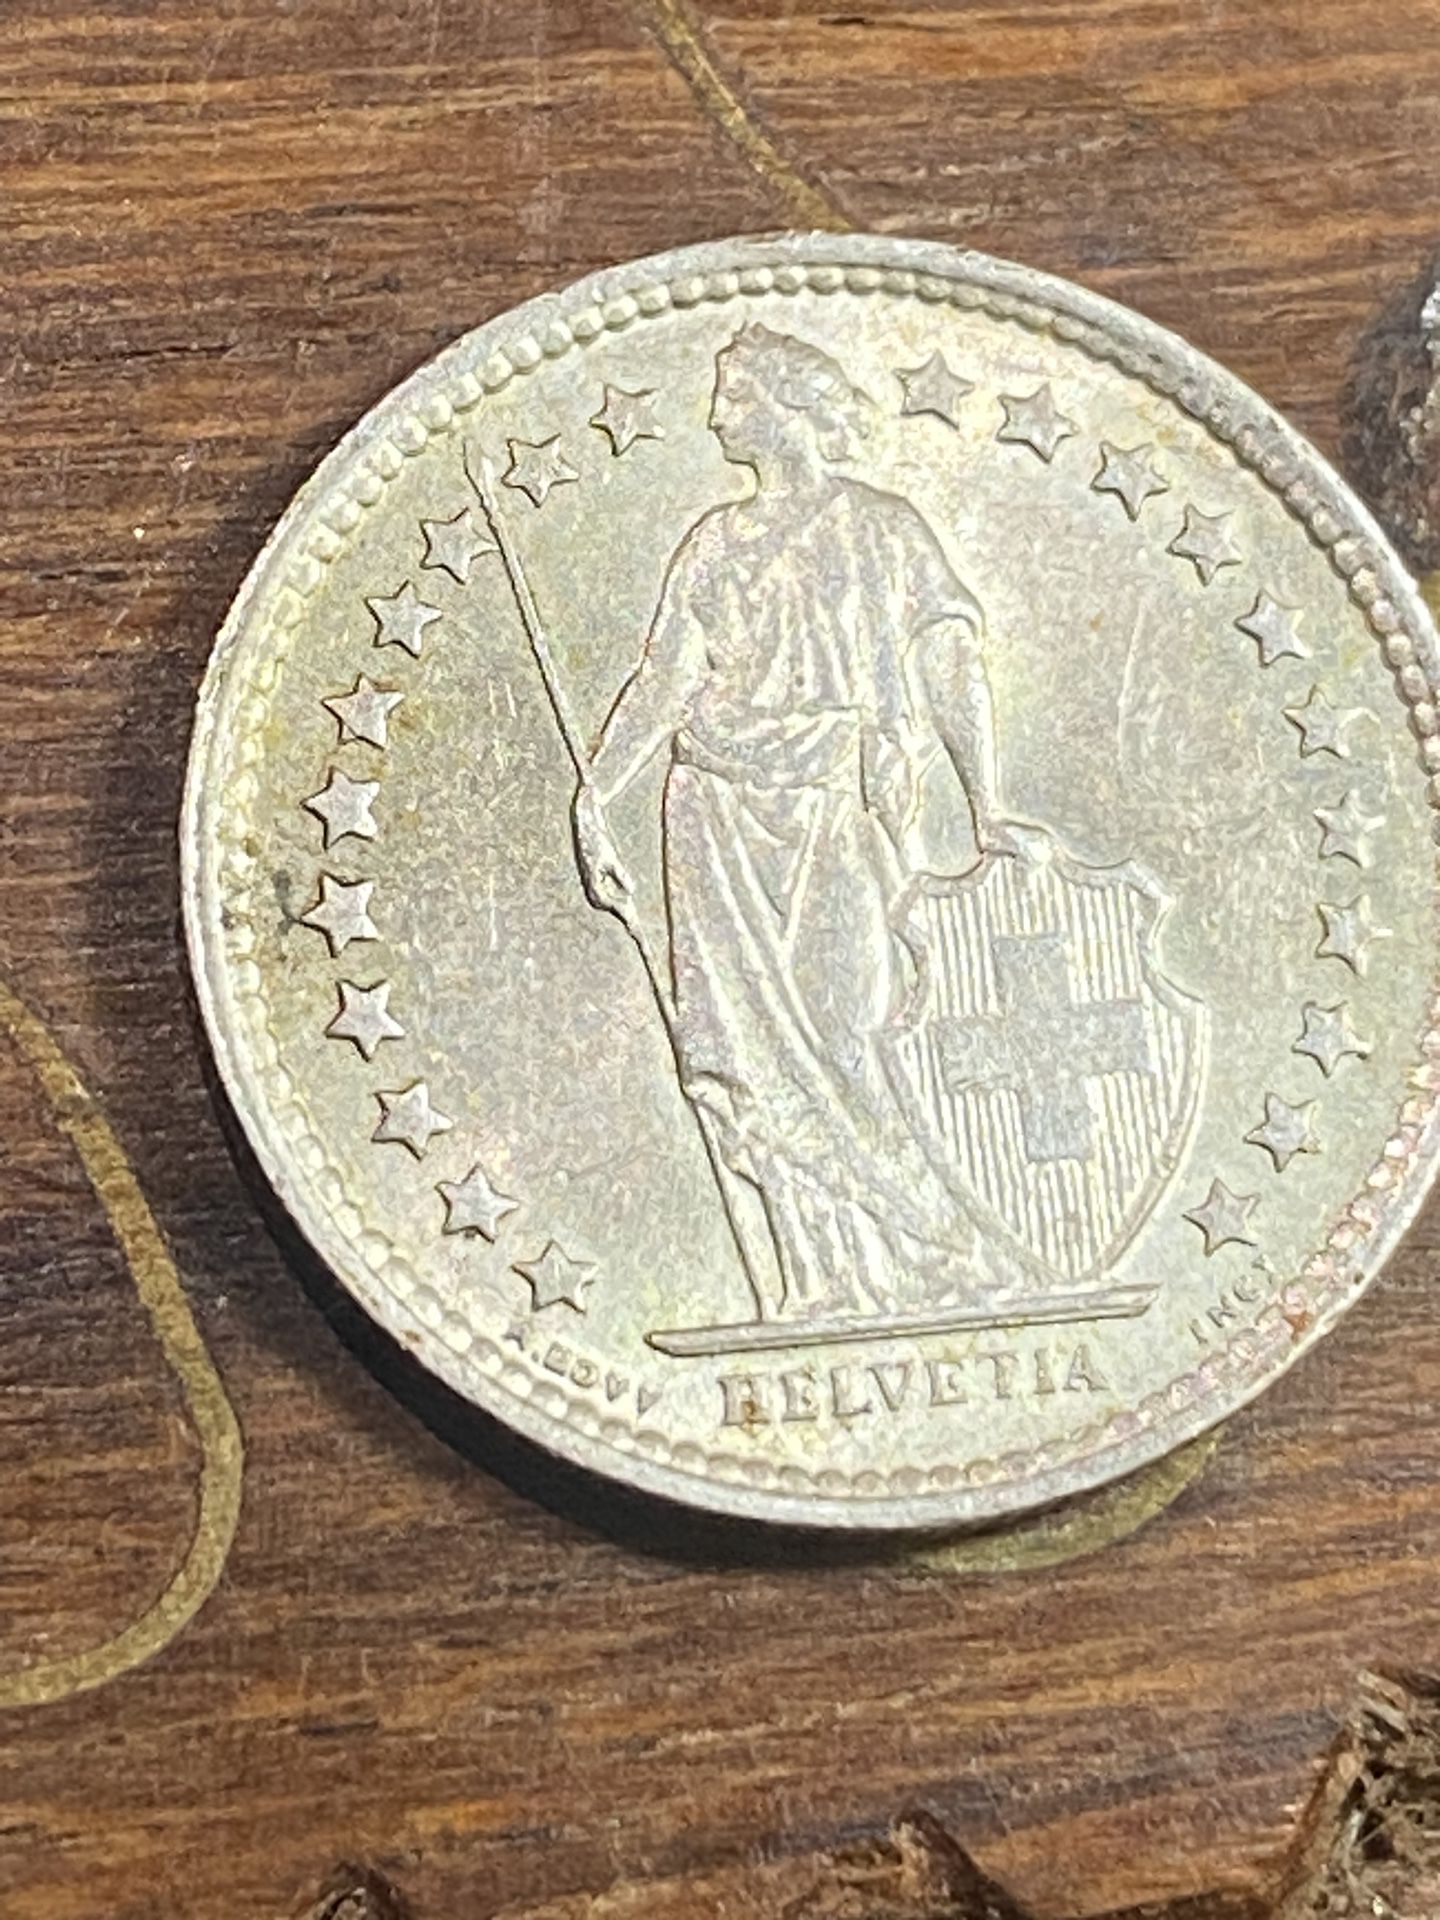 1963 BSWITZERLAND - SILVER 2 Francs Coin HELVETIA Symbolizes SWISS Nation i82299